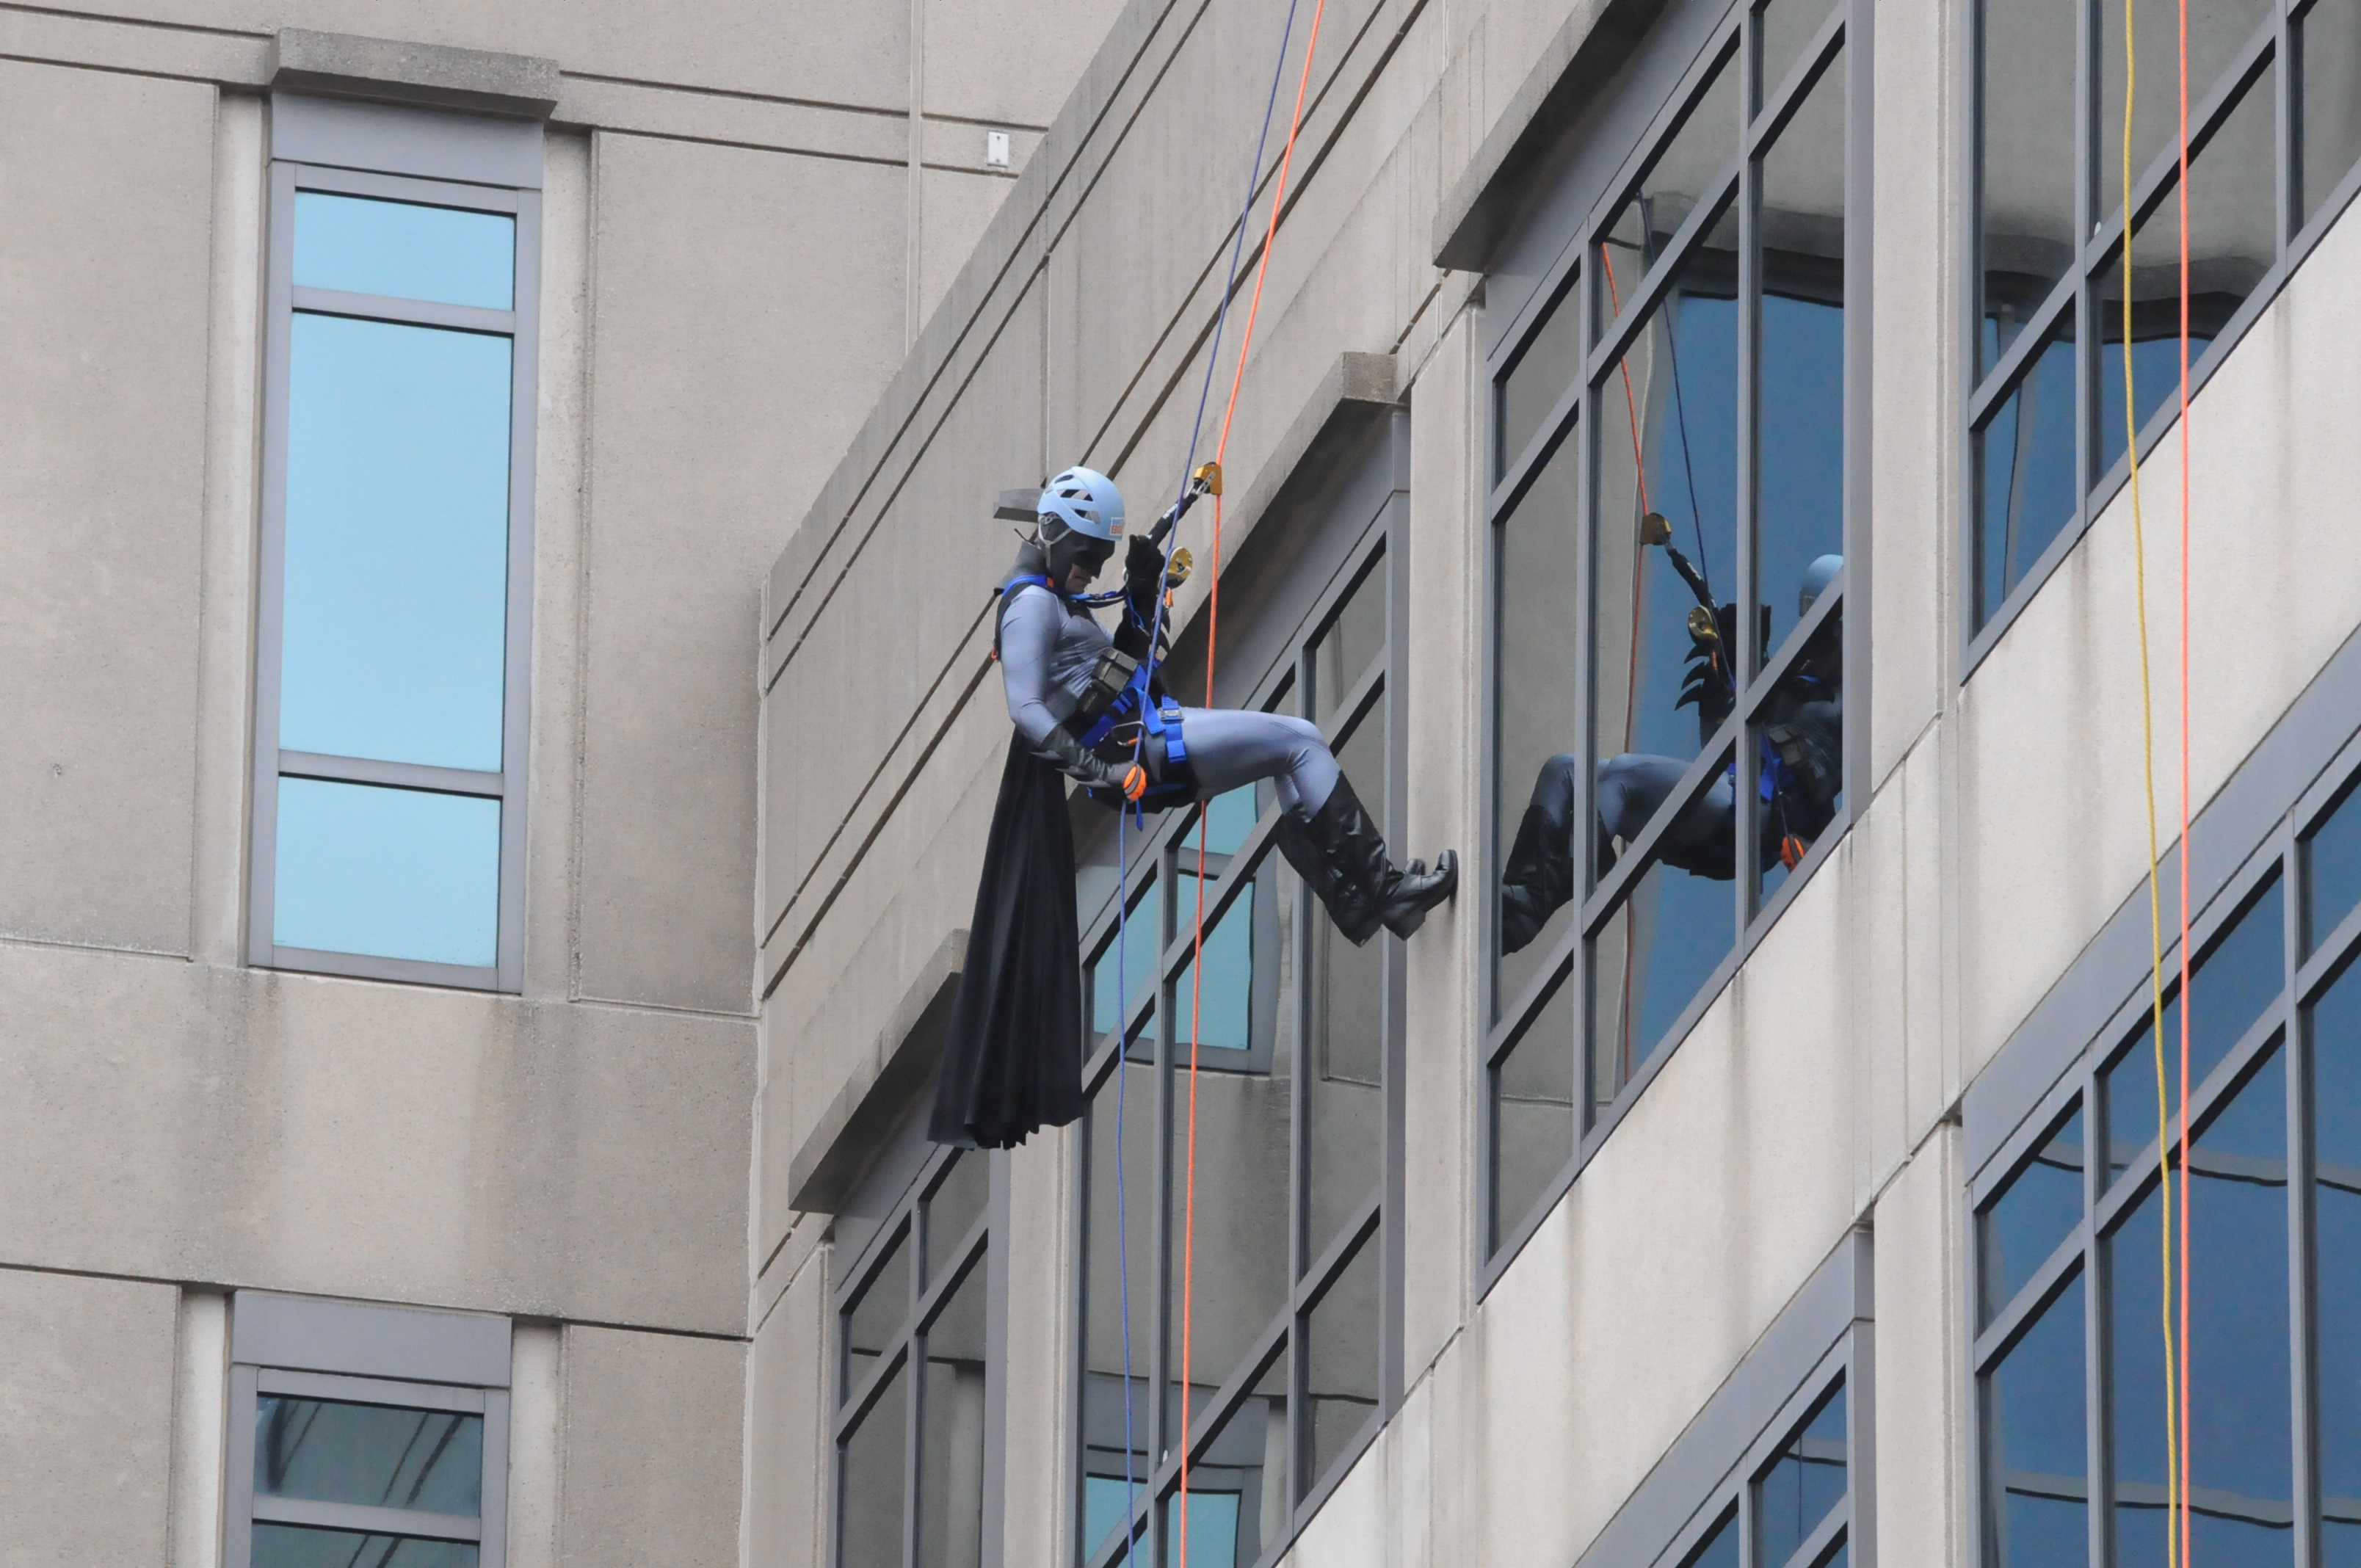 Participants rappelled down the AutoZone building downtown in all manner of costume, including Batman. (Kindred Place)